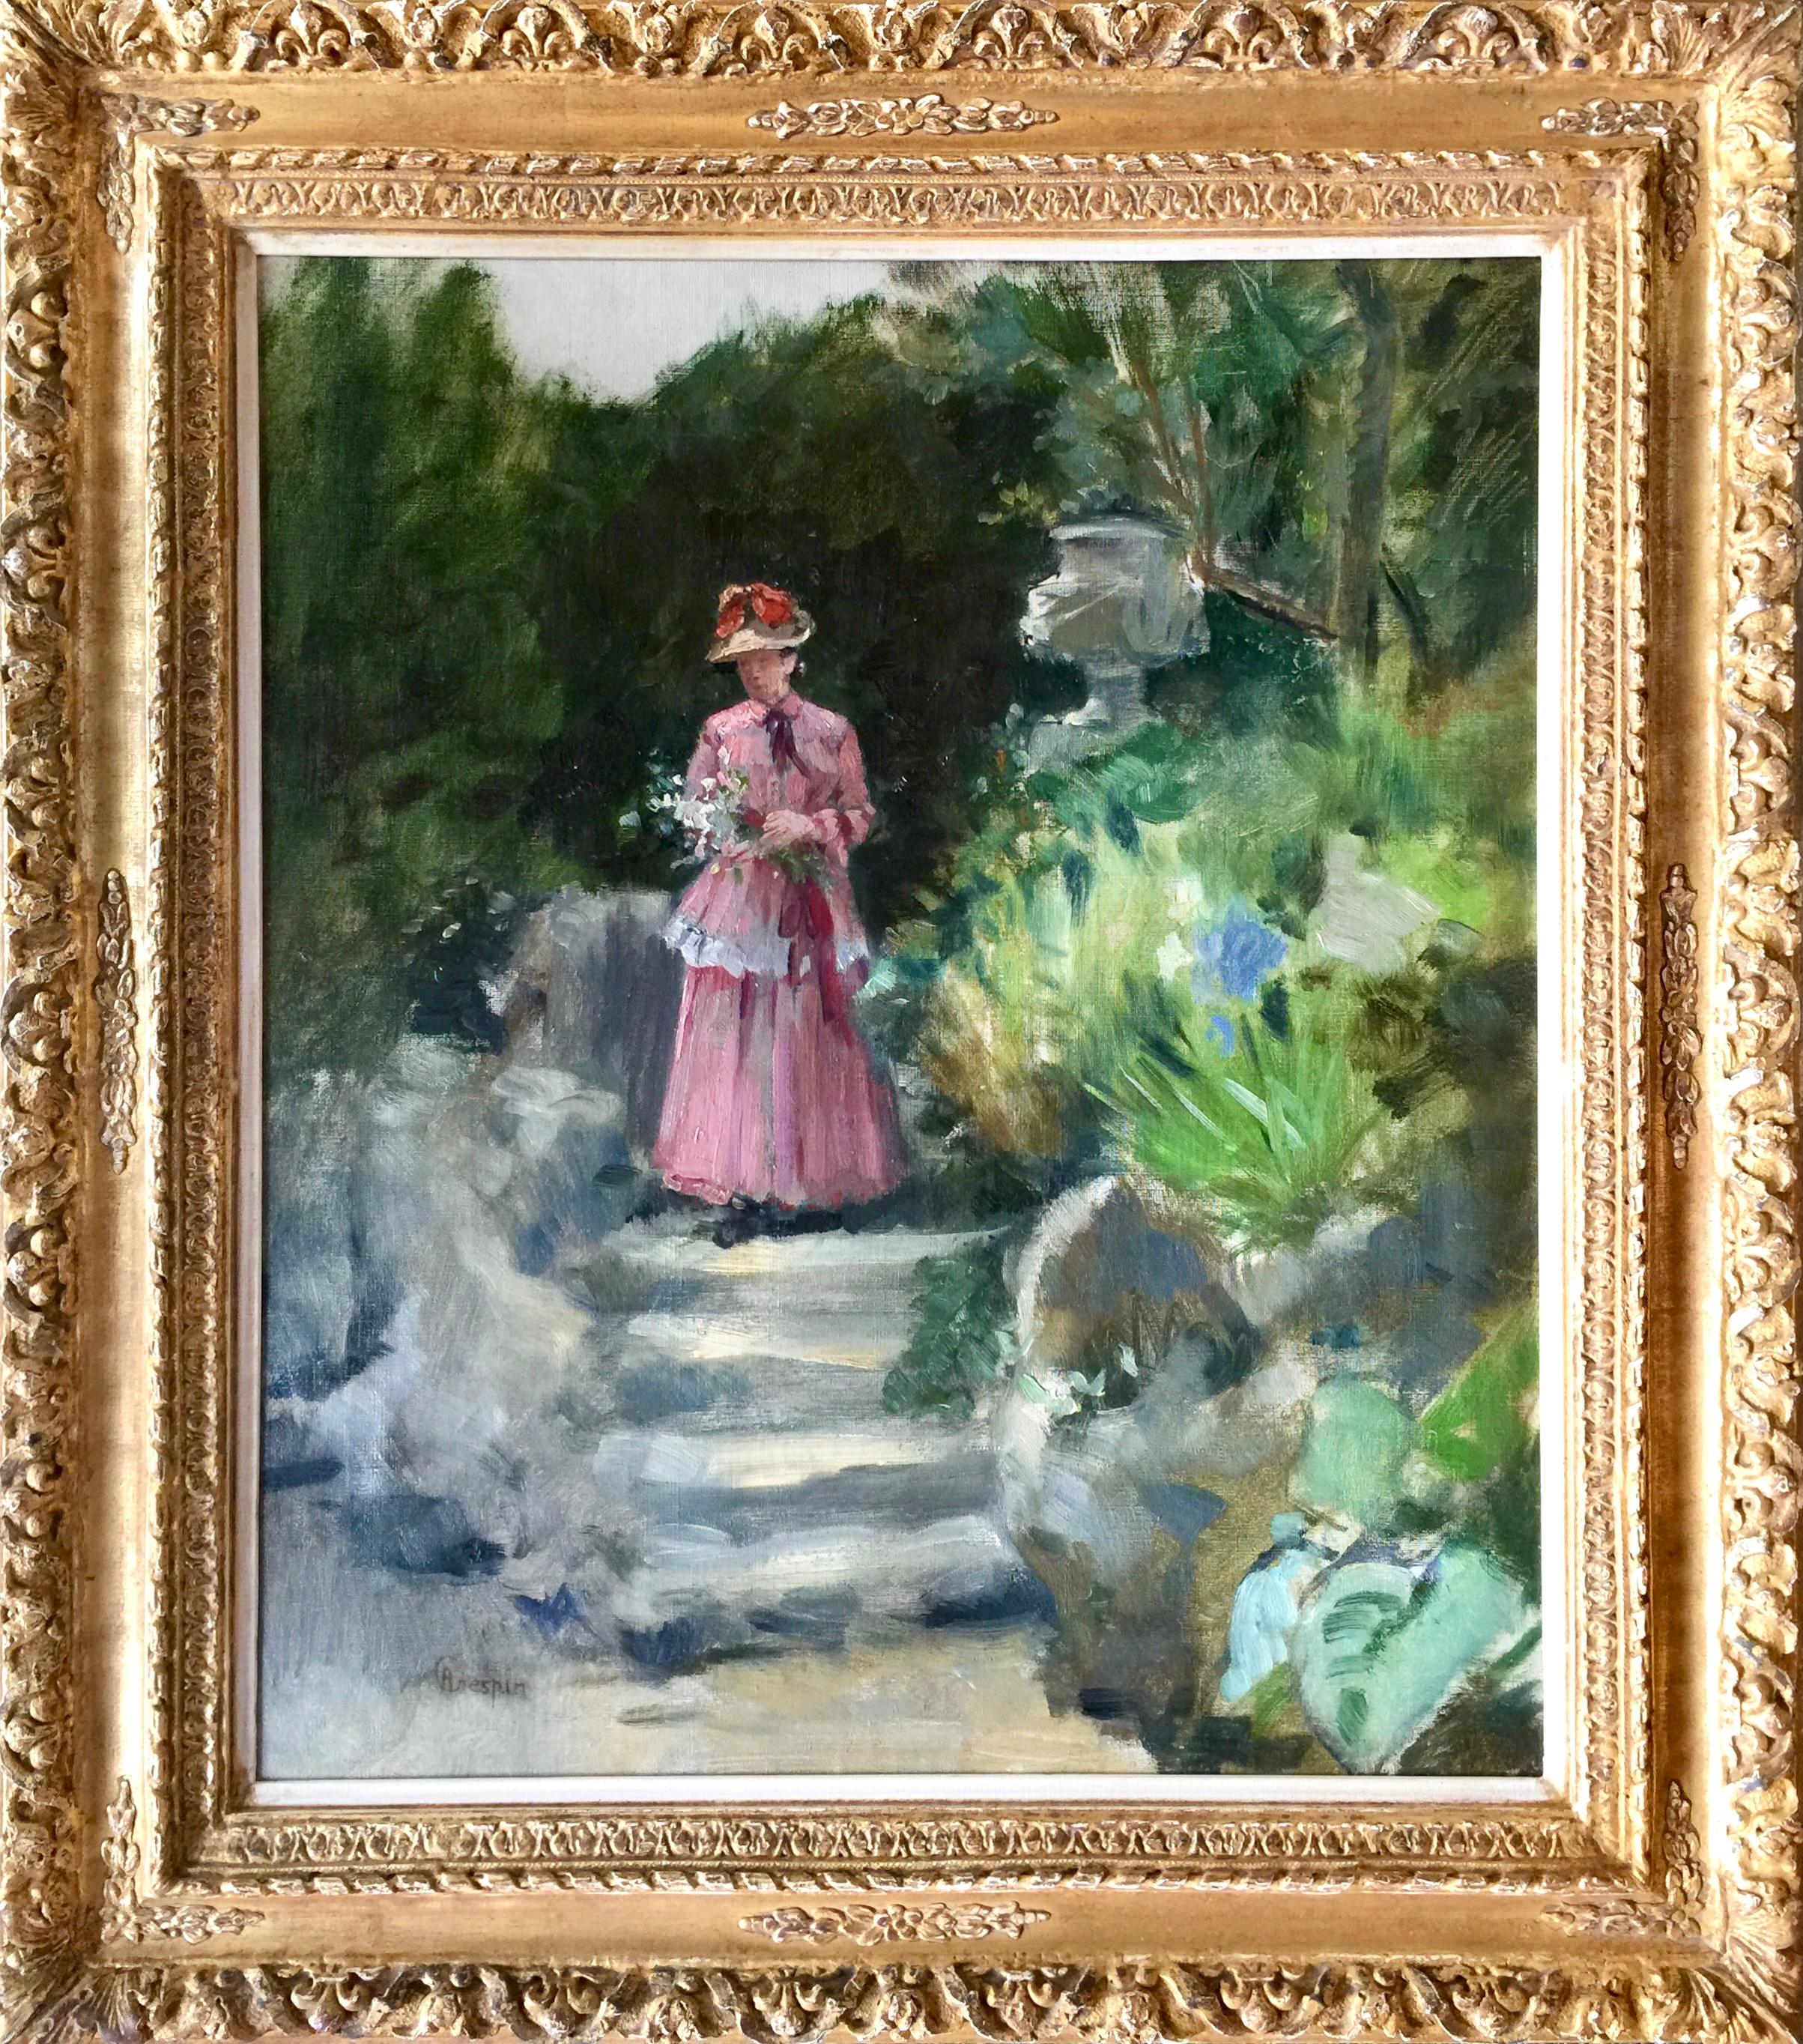 Crespin Adolphe Landscape Painting - 'Lady in the Garden' by Adolphe Crespin, Brussels 1859 – 1944, Belgian Painter